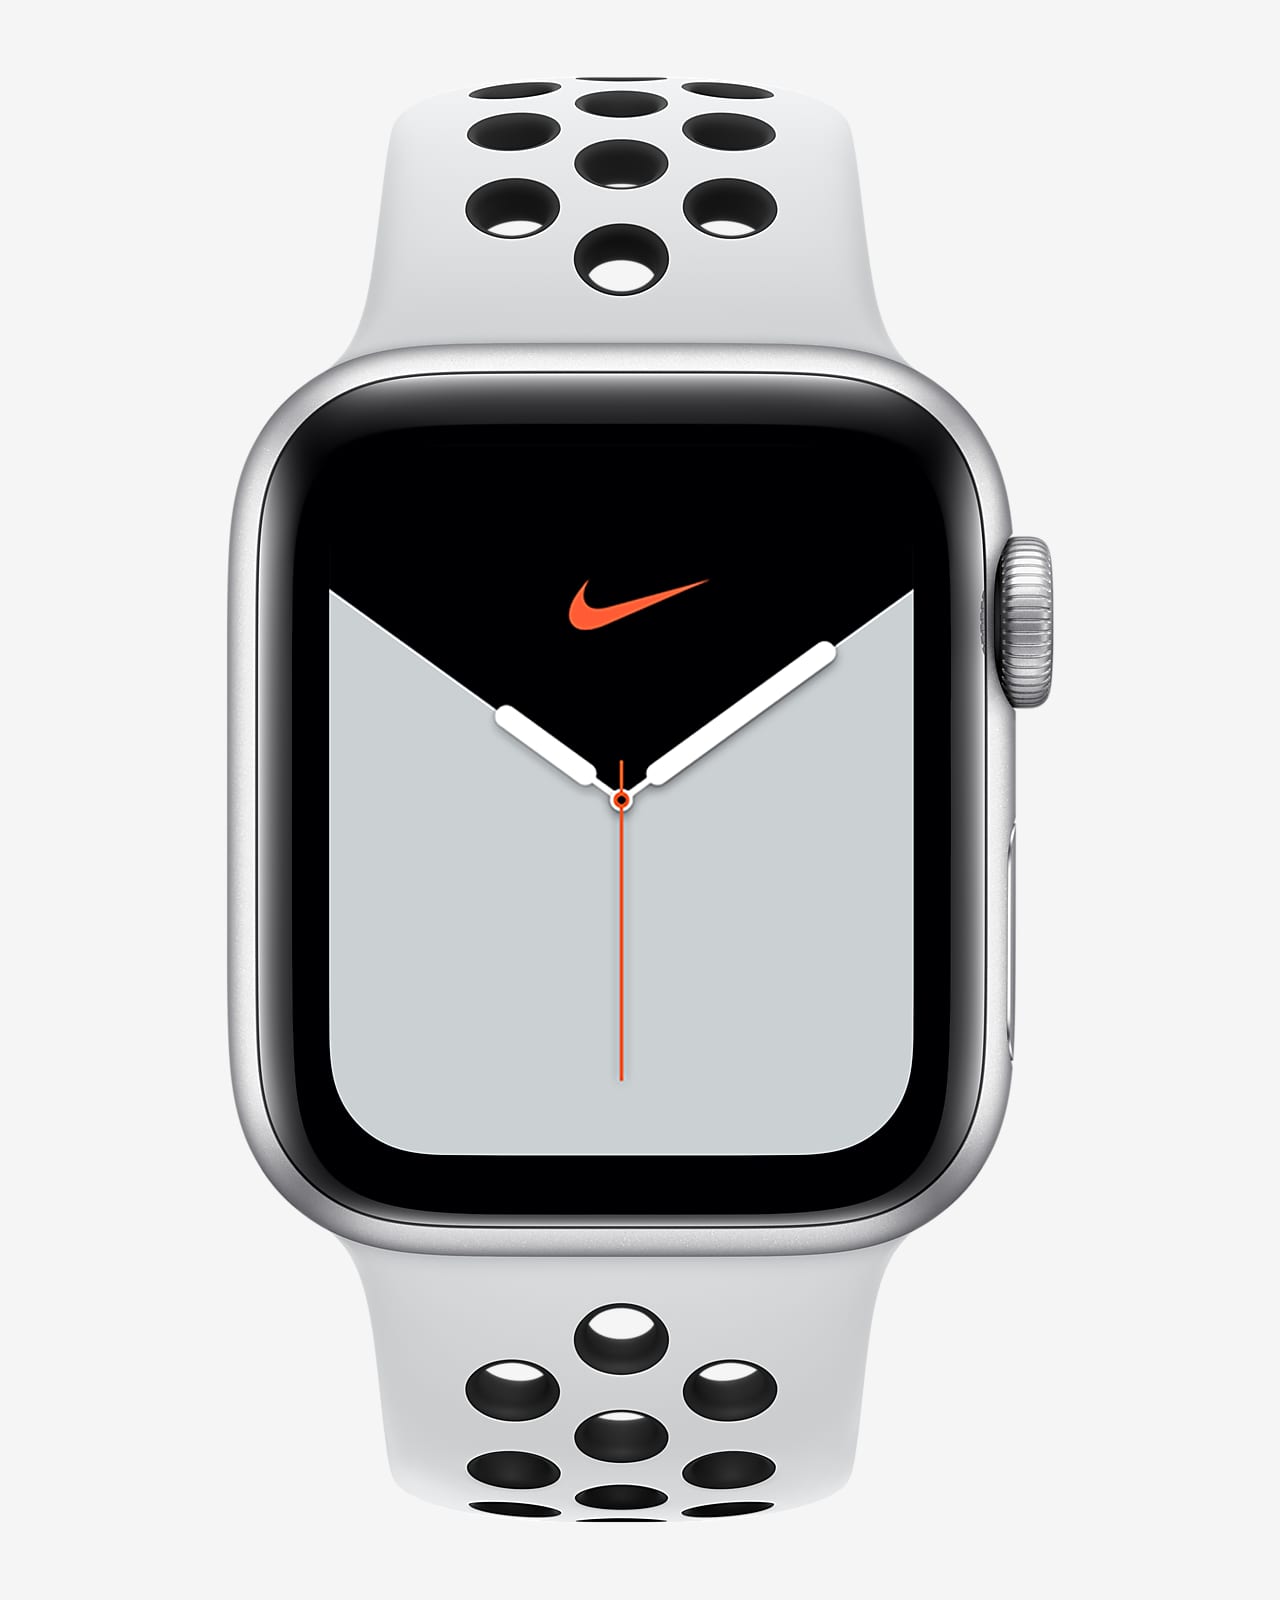 Apple Watch With Nike Top Sellers, 56% OFF | lagence.tv